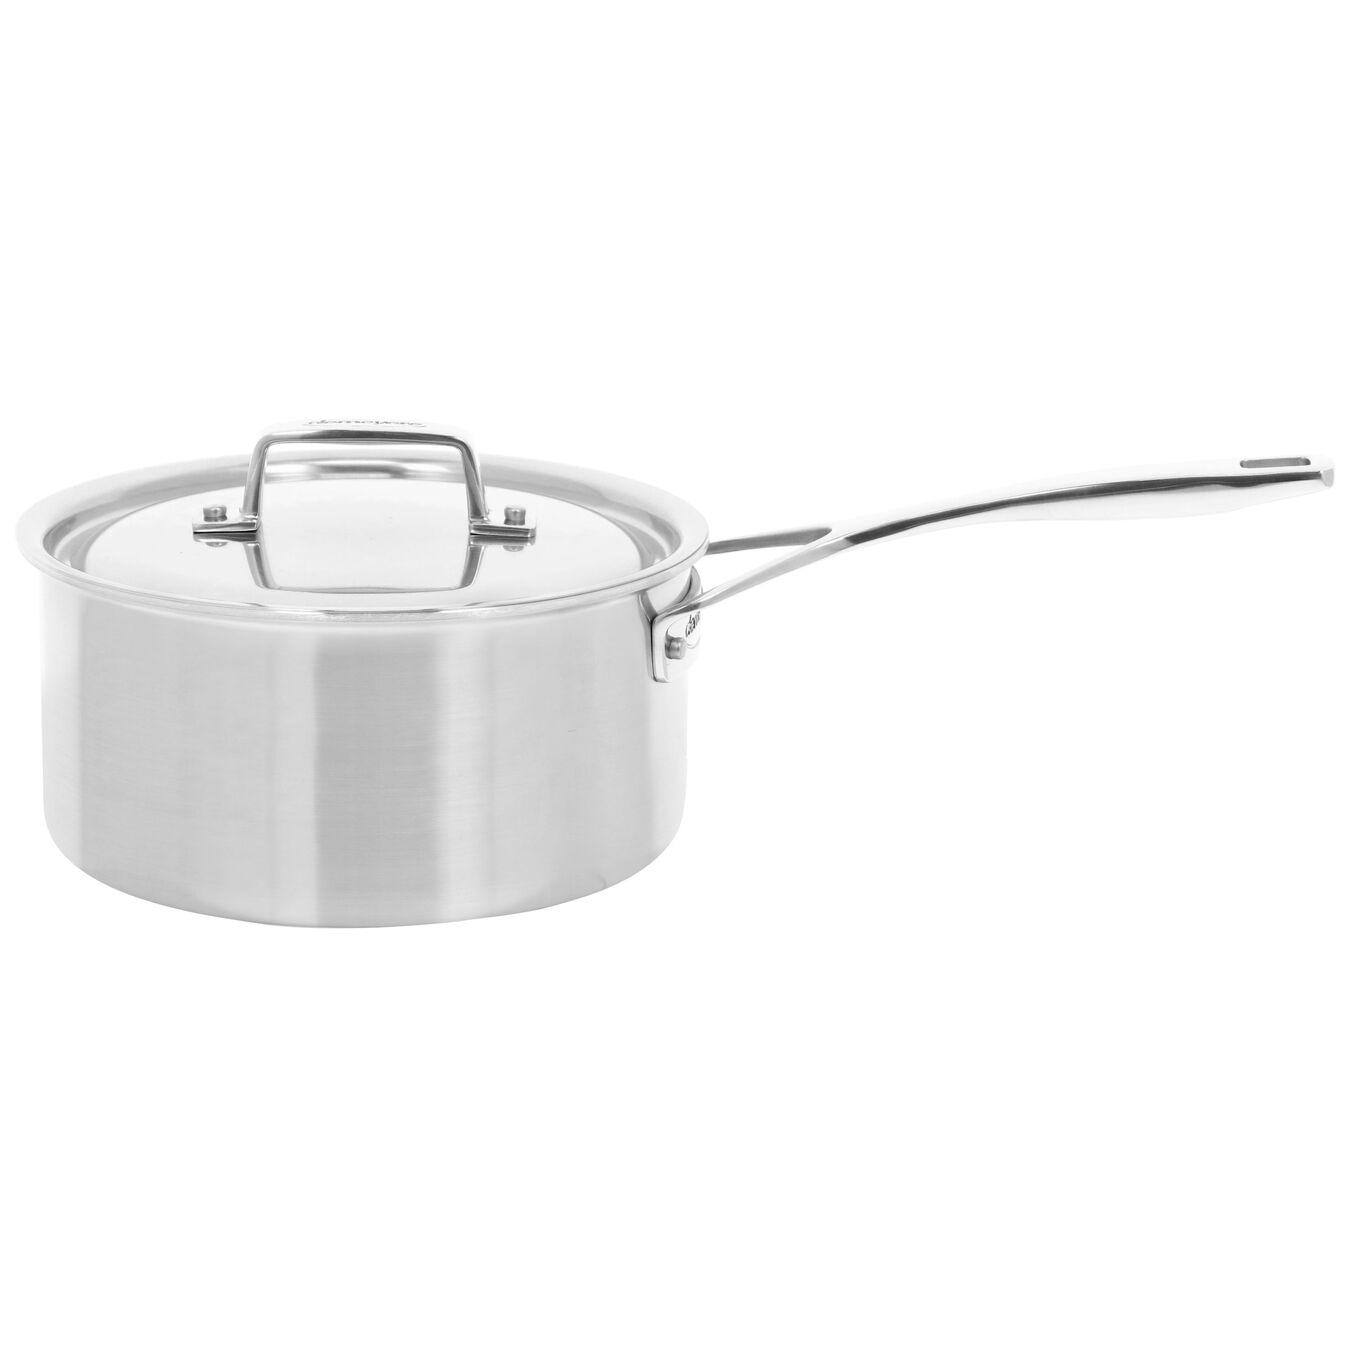 1.4 l 18/10 Stainless Steel round Sauce pan, silver,,large 1